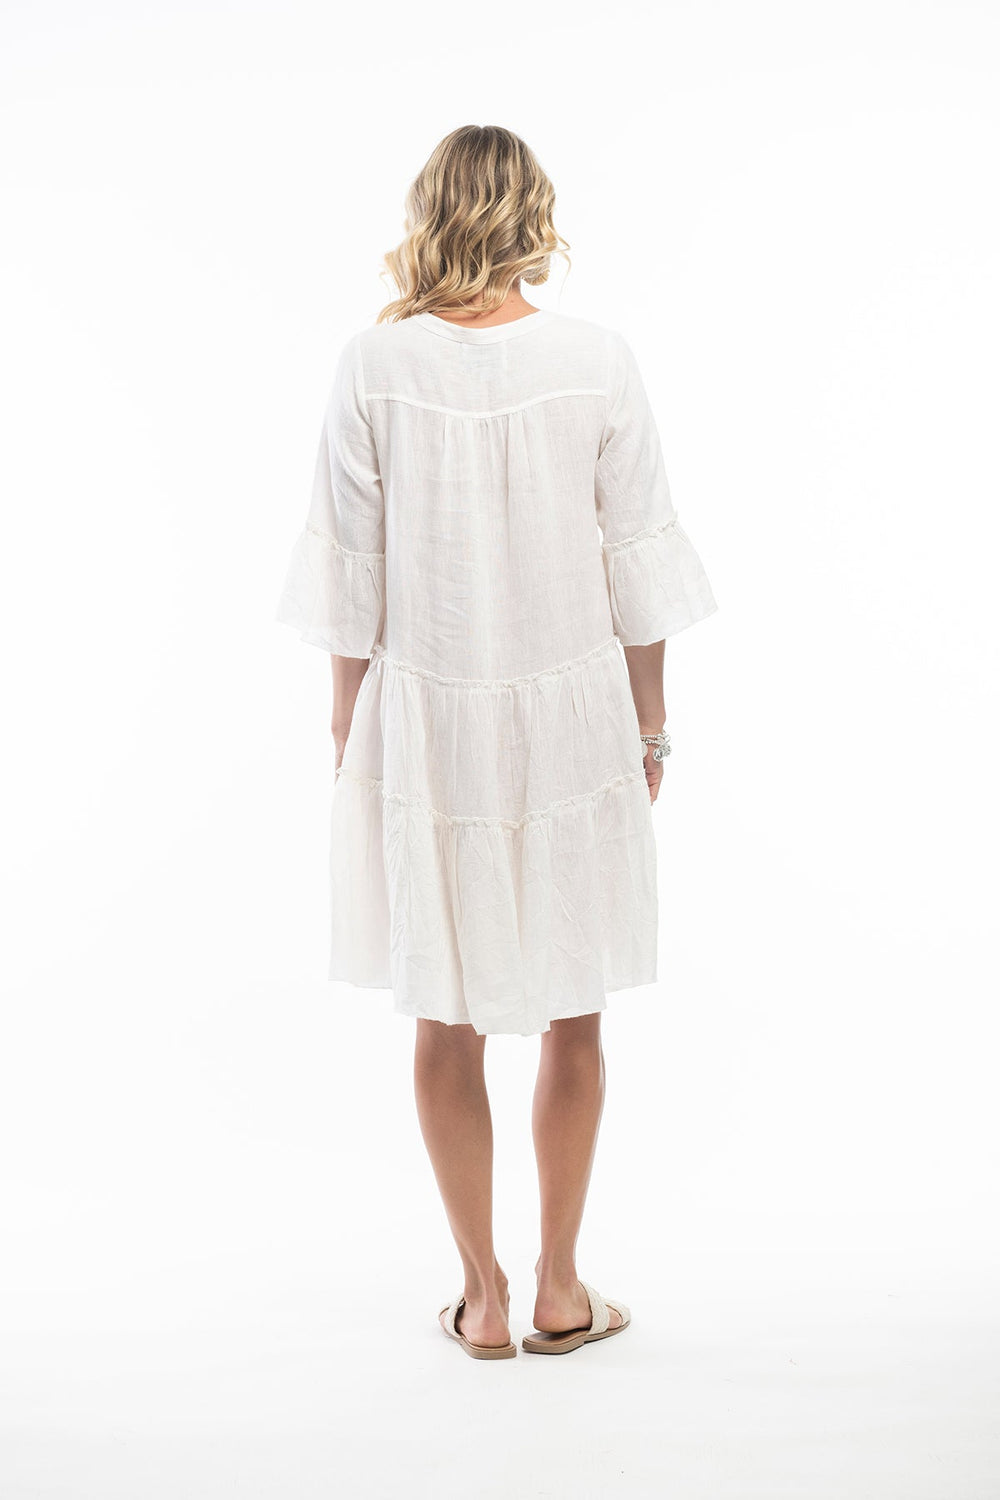 Woman wearing a cream linen dress by escape Sold and shipped from pizazz Nelson Bay, women's dresses online Australia